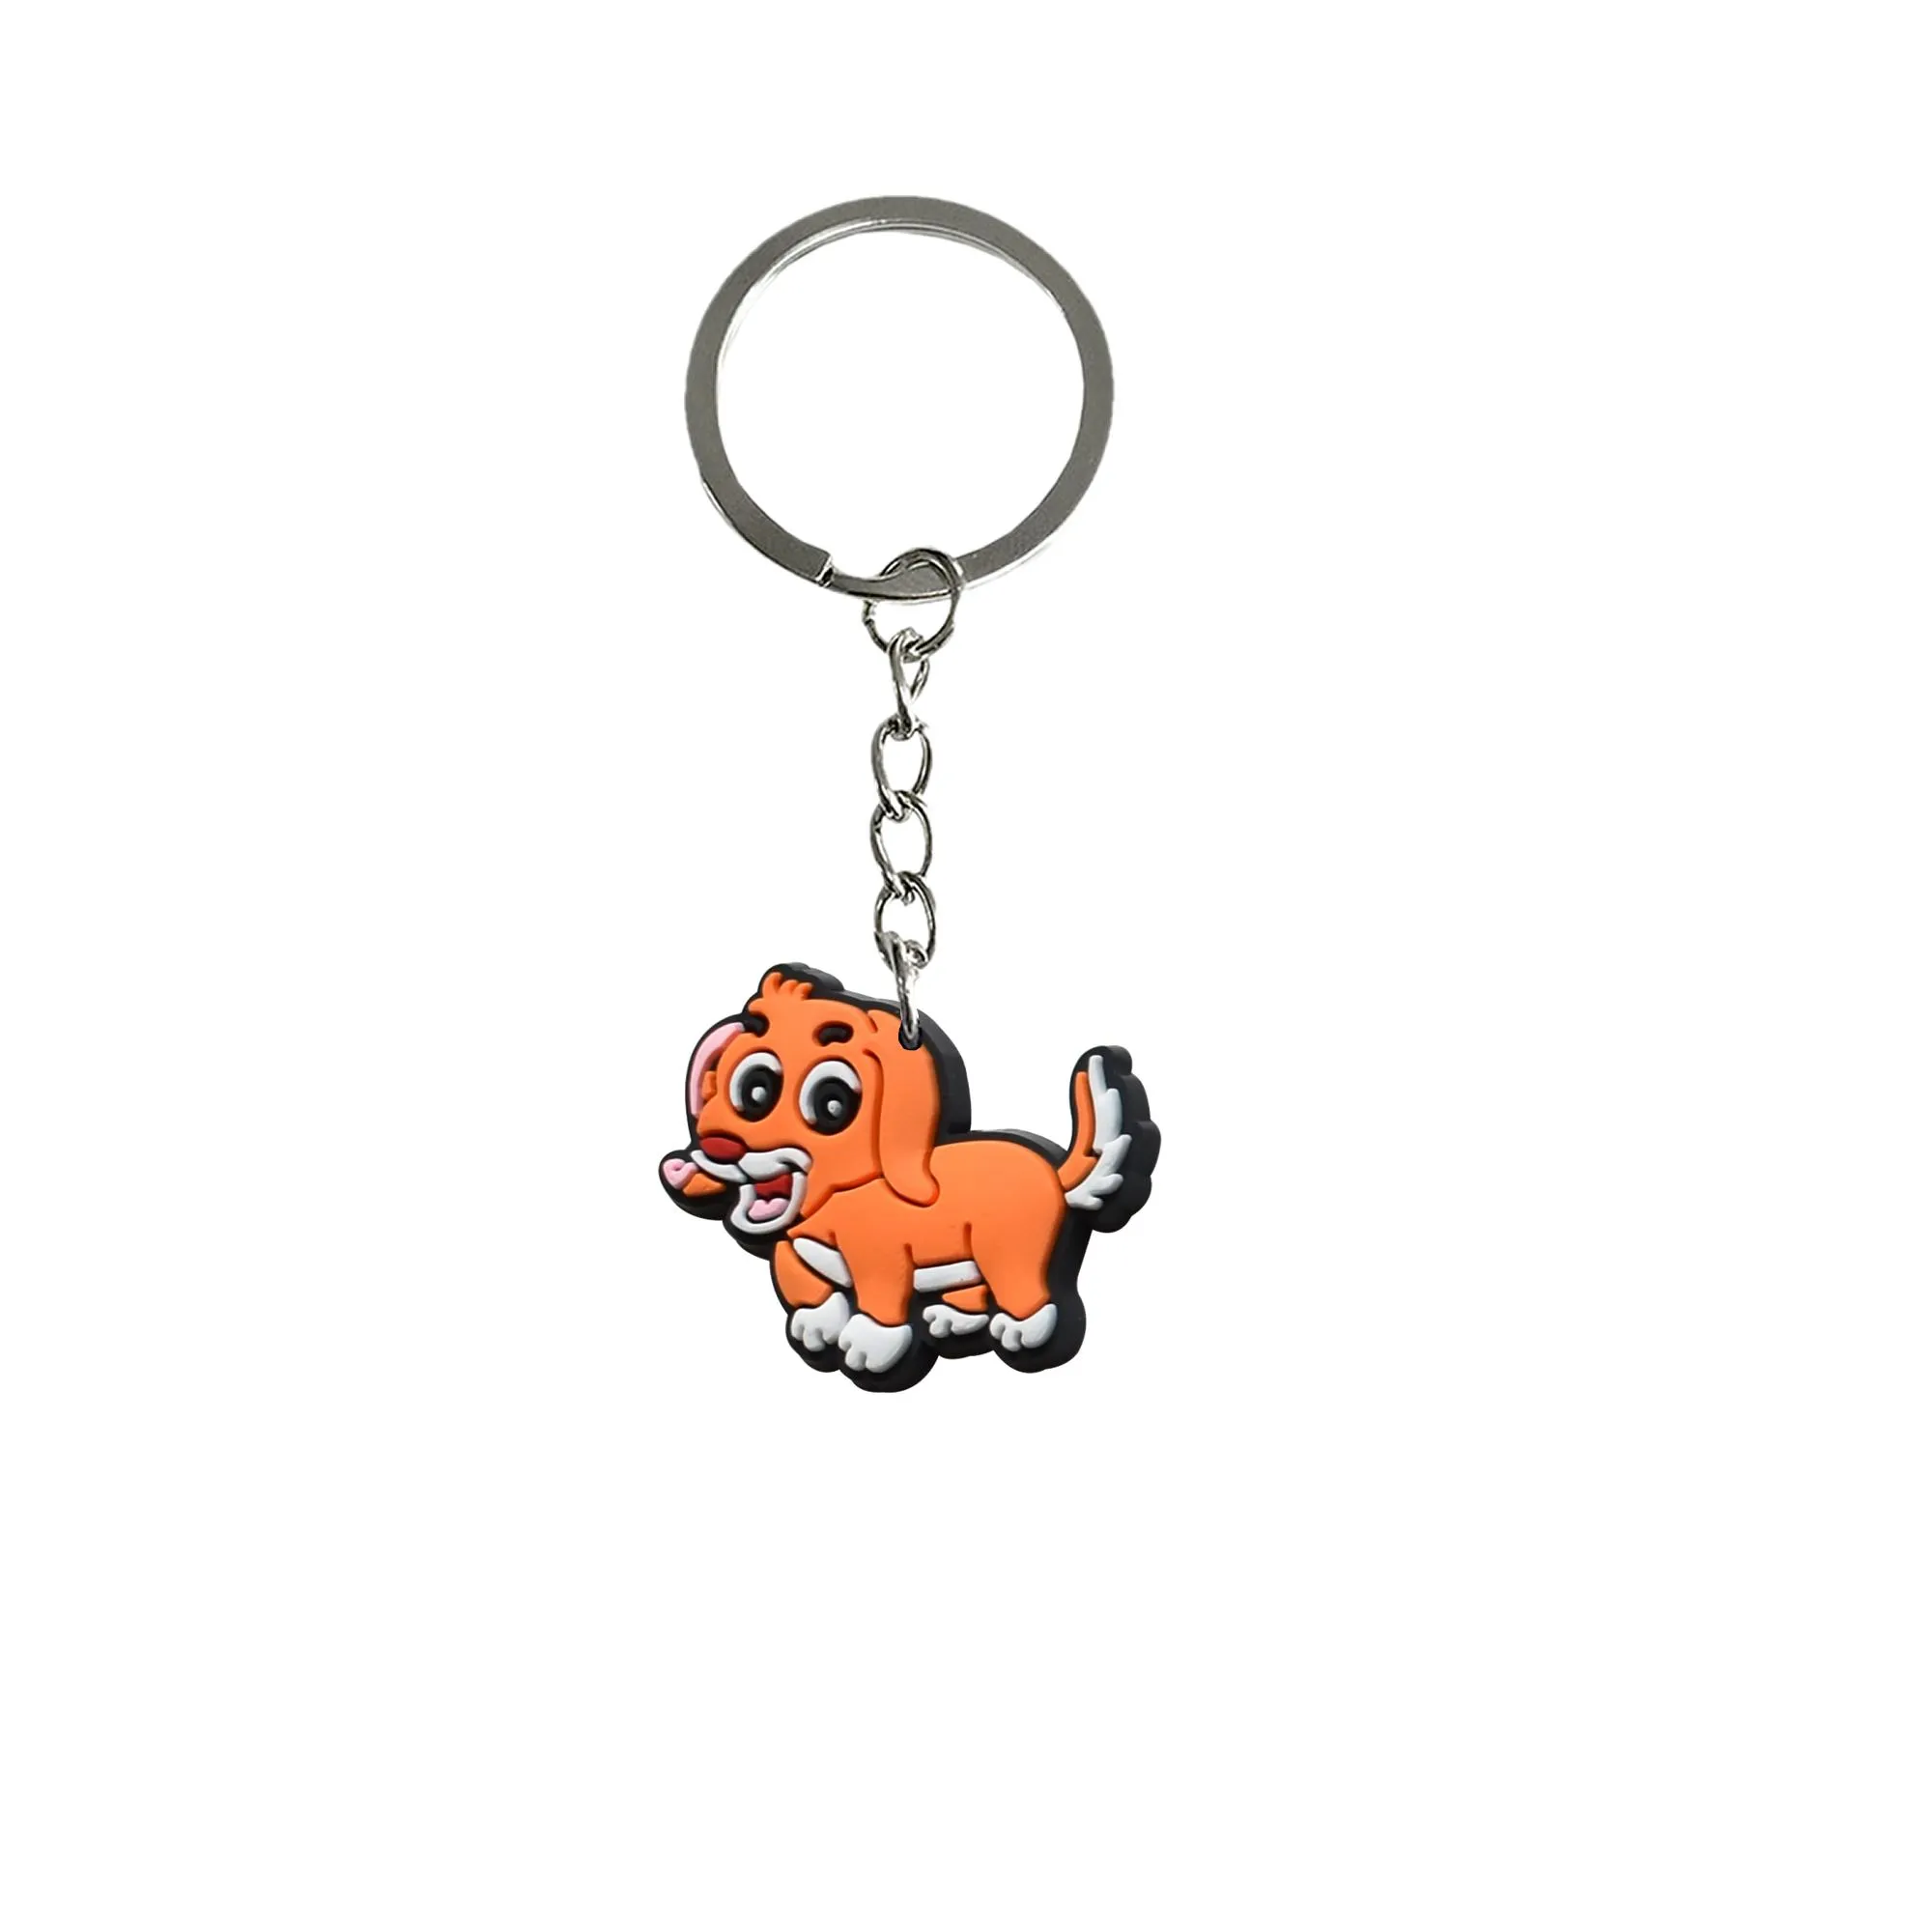 new dog 2 keychain key chain ring christmas gift for fans keychains girls rings keyring suitable schoolbag backpack men car bag